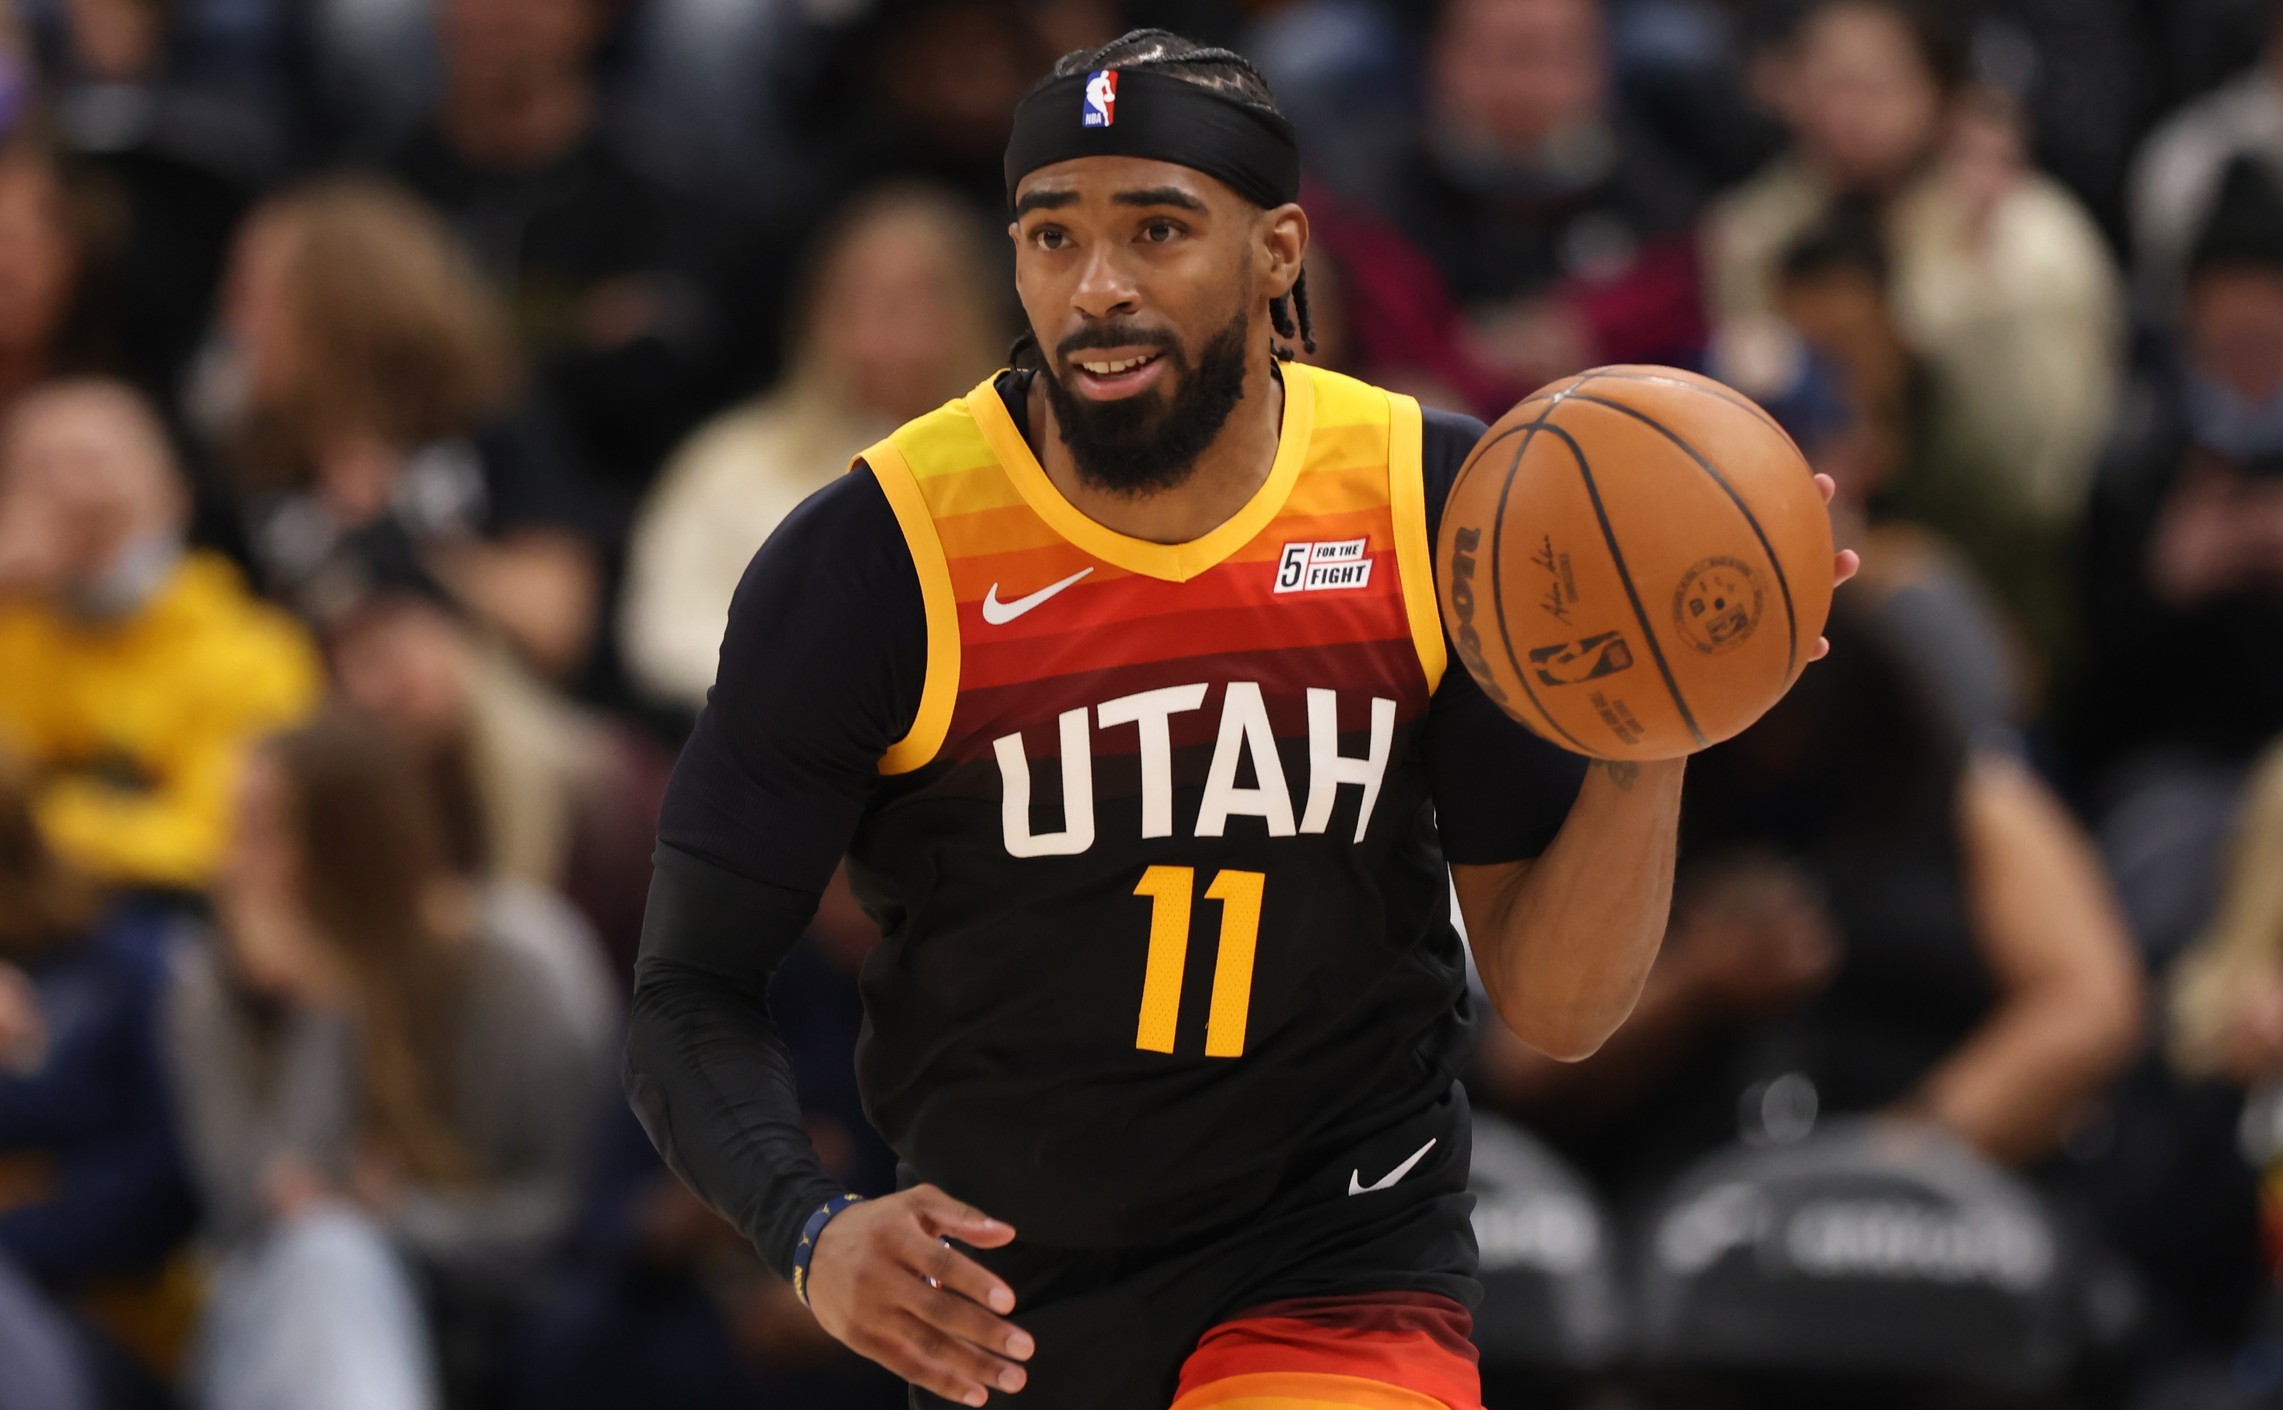 NBA Futures: There's Value on Utah's Live Win Total